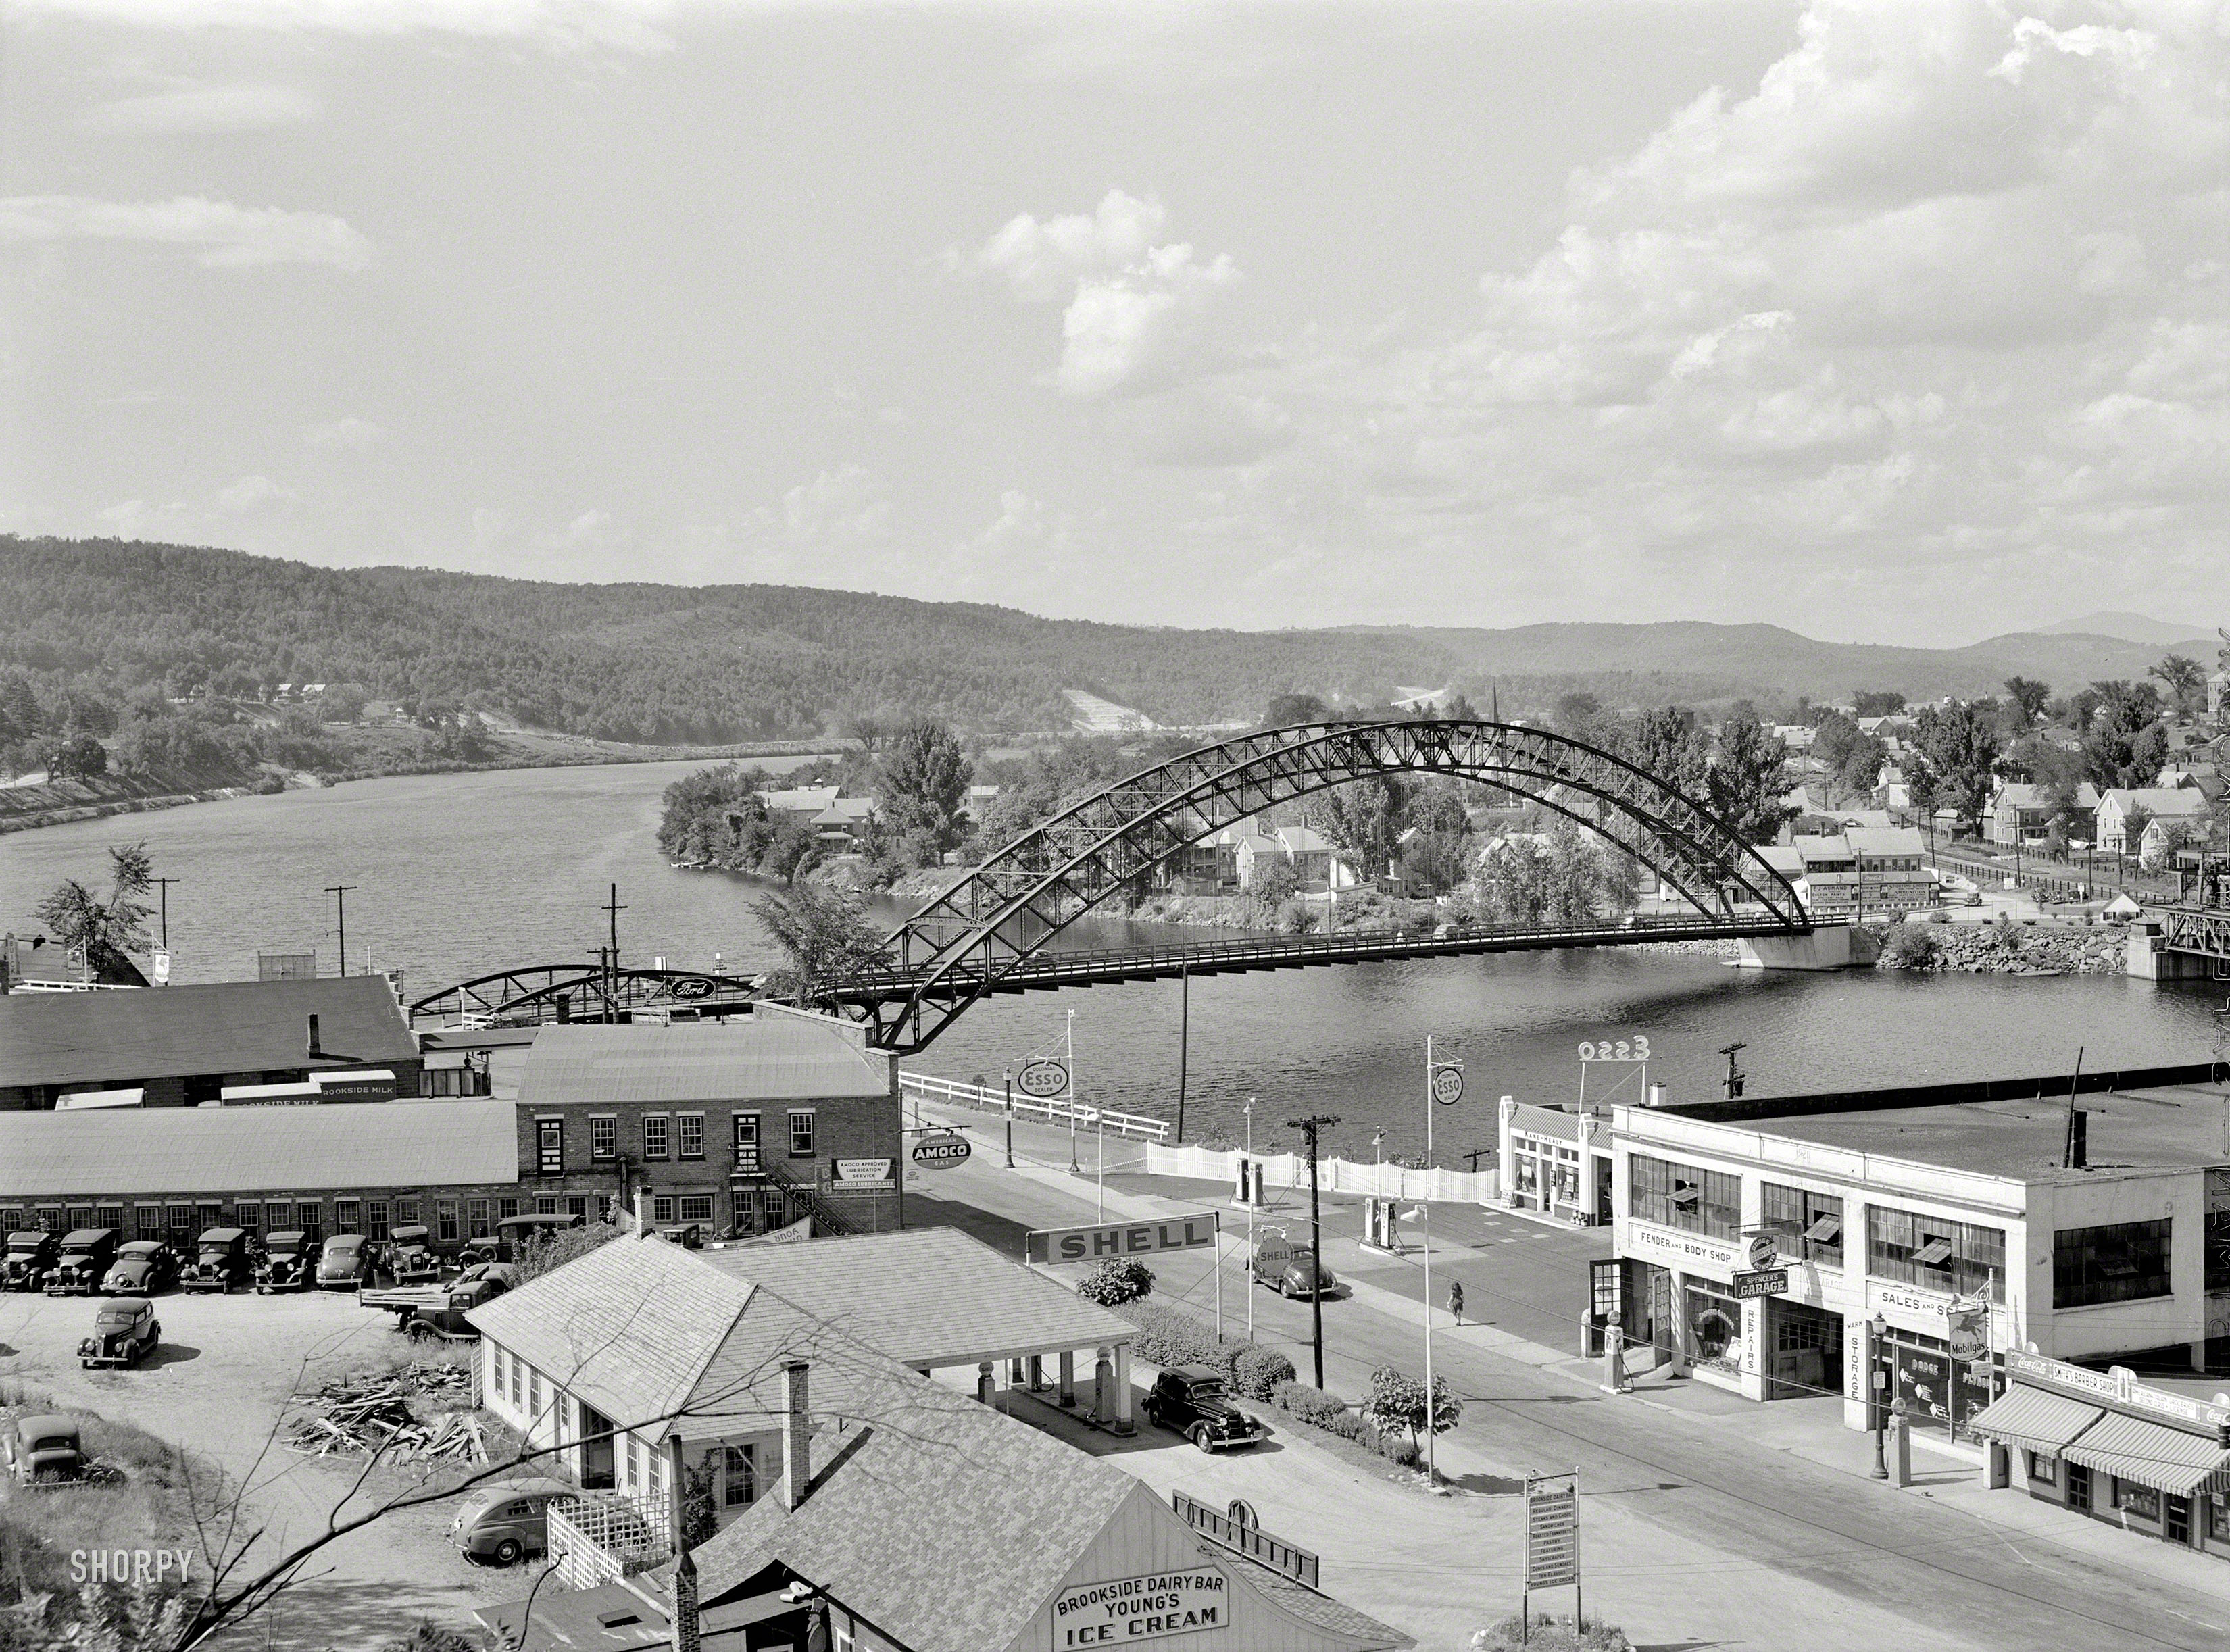 August 1941. "The Connecticut River at Bellows Falls, Vermont, and on the far side of the river, North Walpole, New Hampshire." Car Heaven. Medium-format negative by Jack Delano for the Office of War Information. View full size.